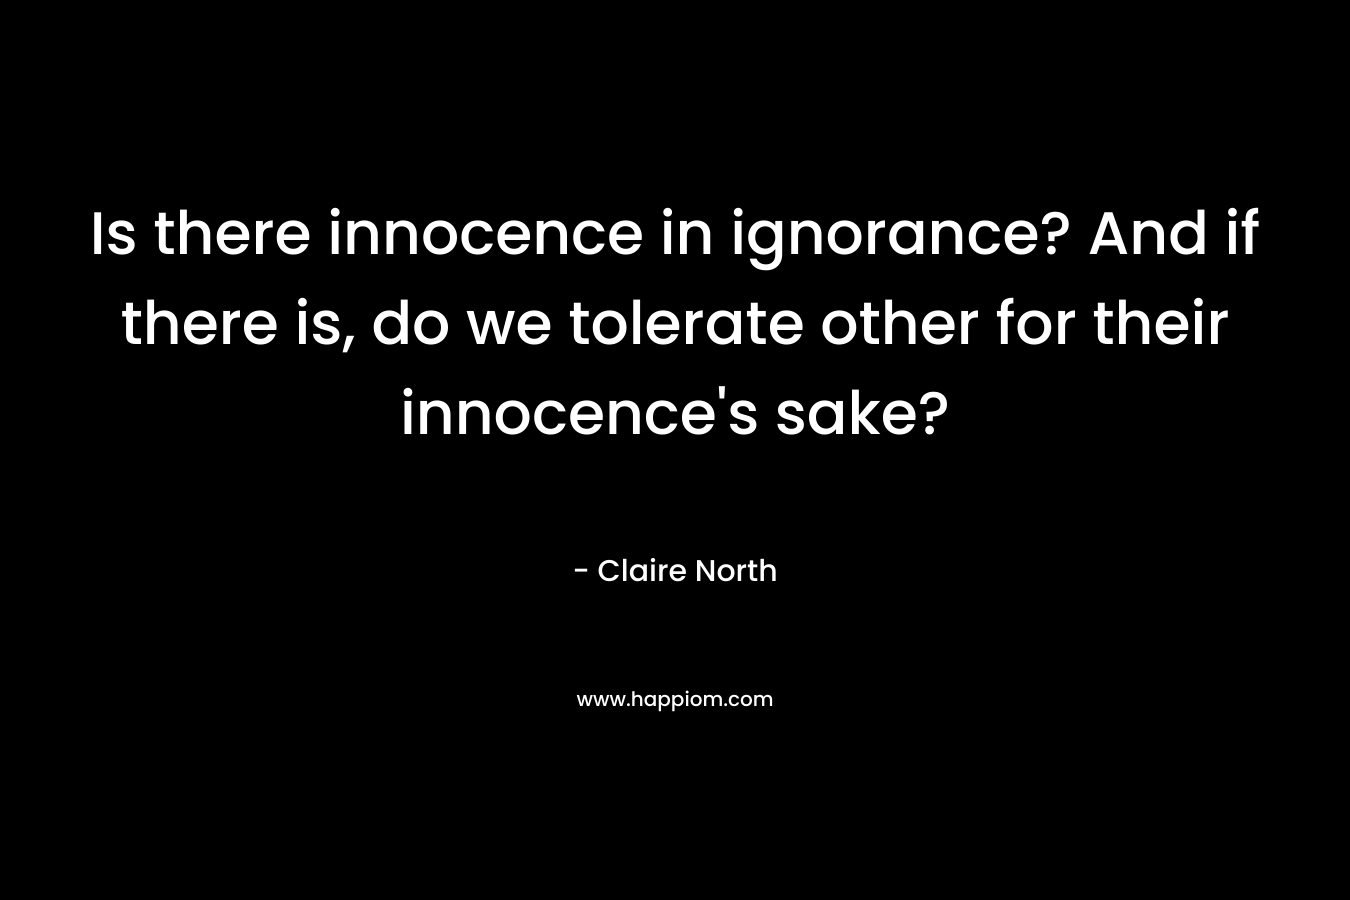 Is there innocence in ignorance? And if there is, do we tolerate other for their innocence’s sake? – Claire North